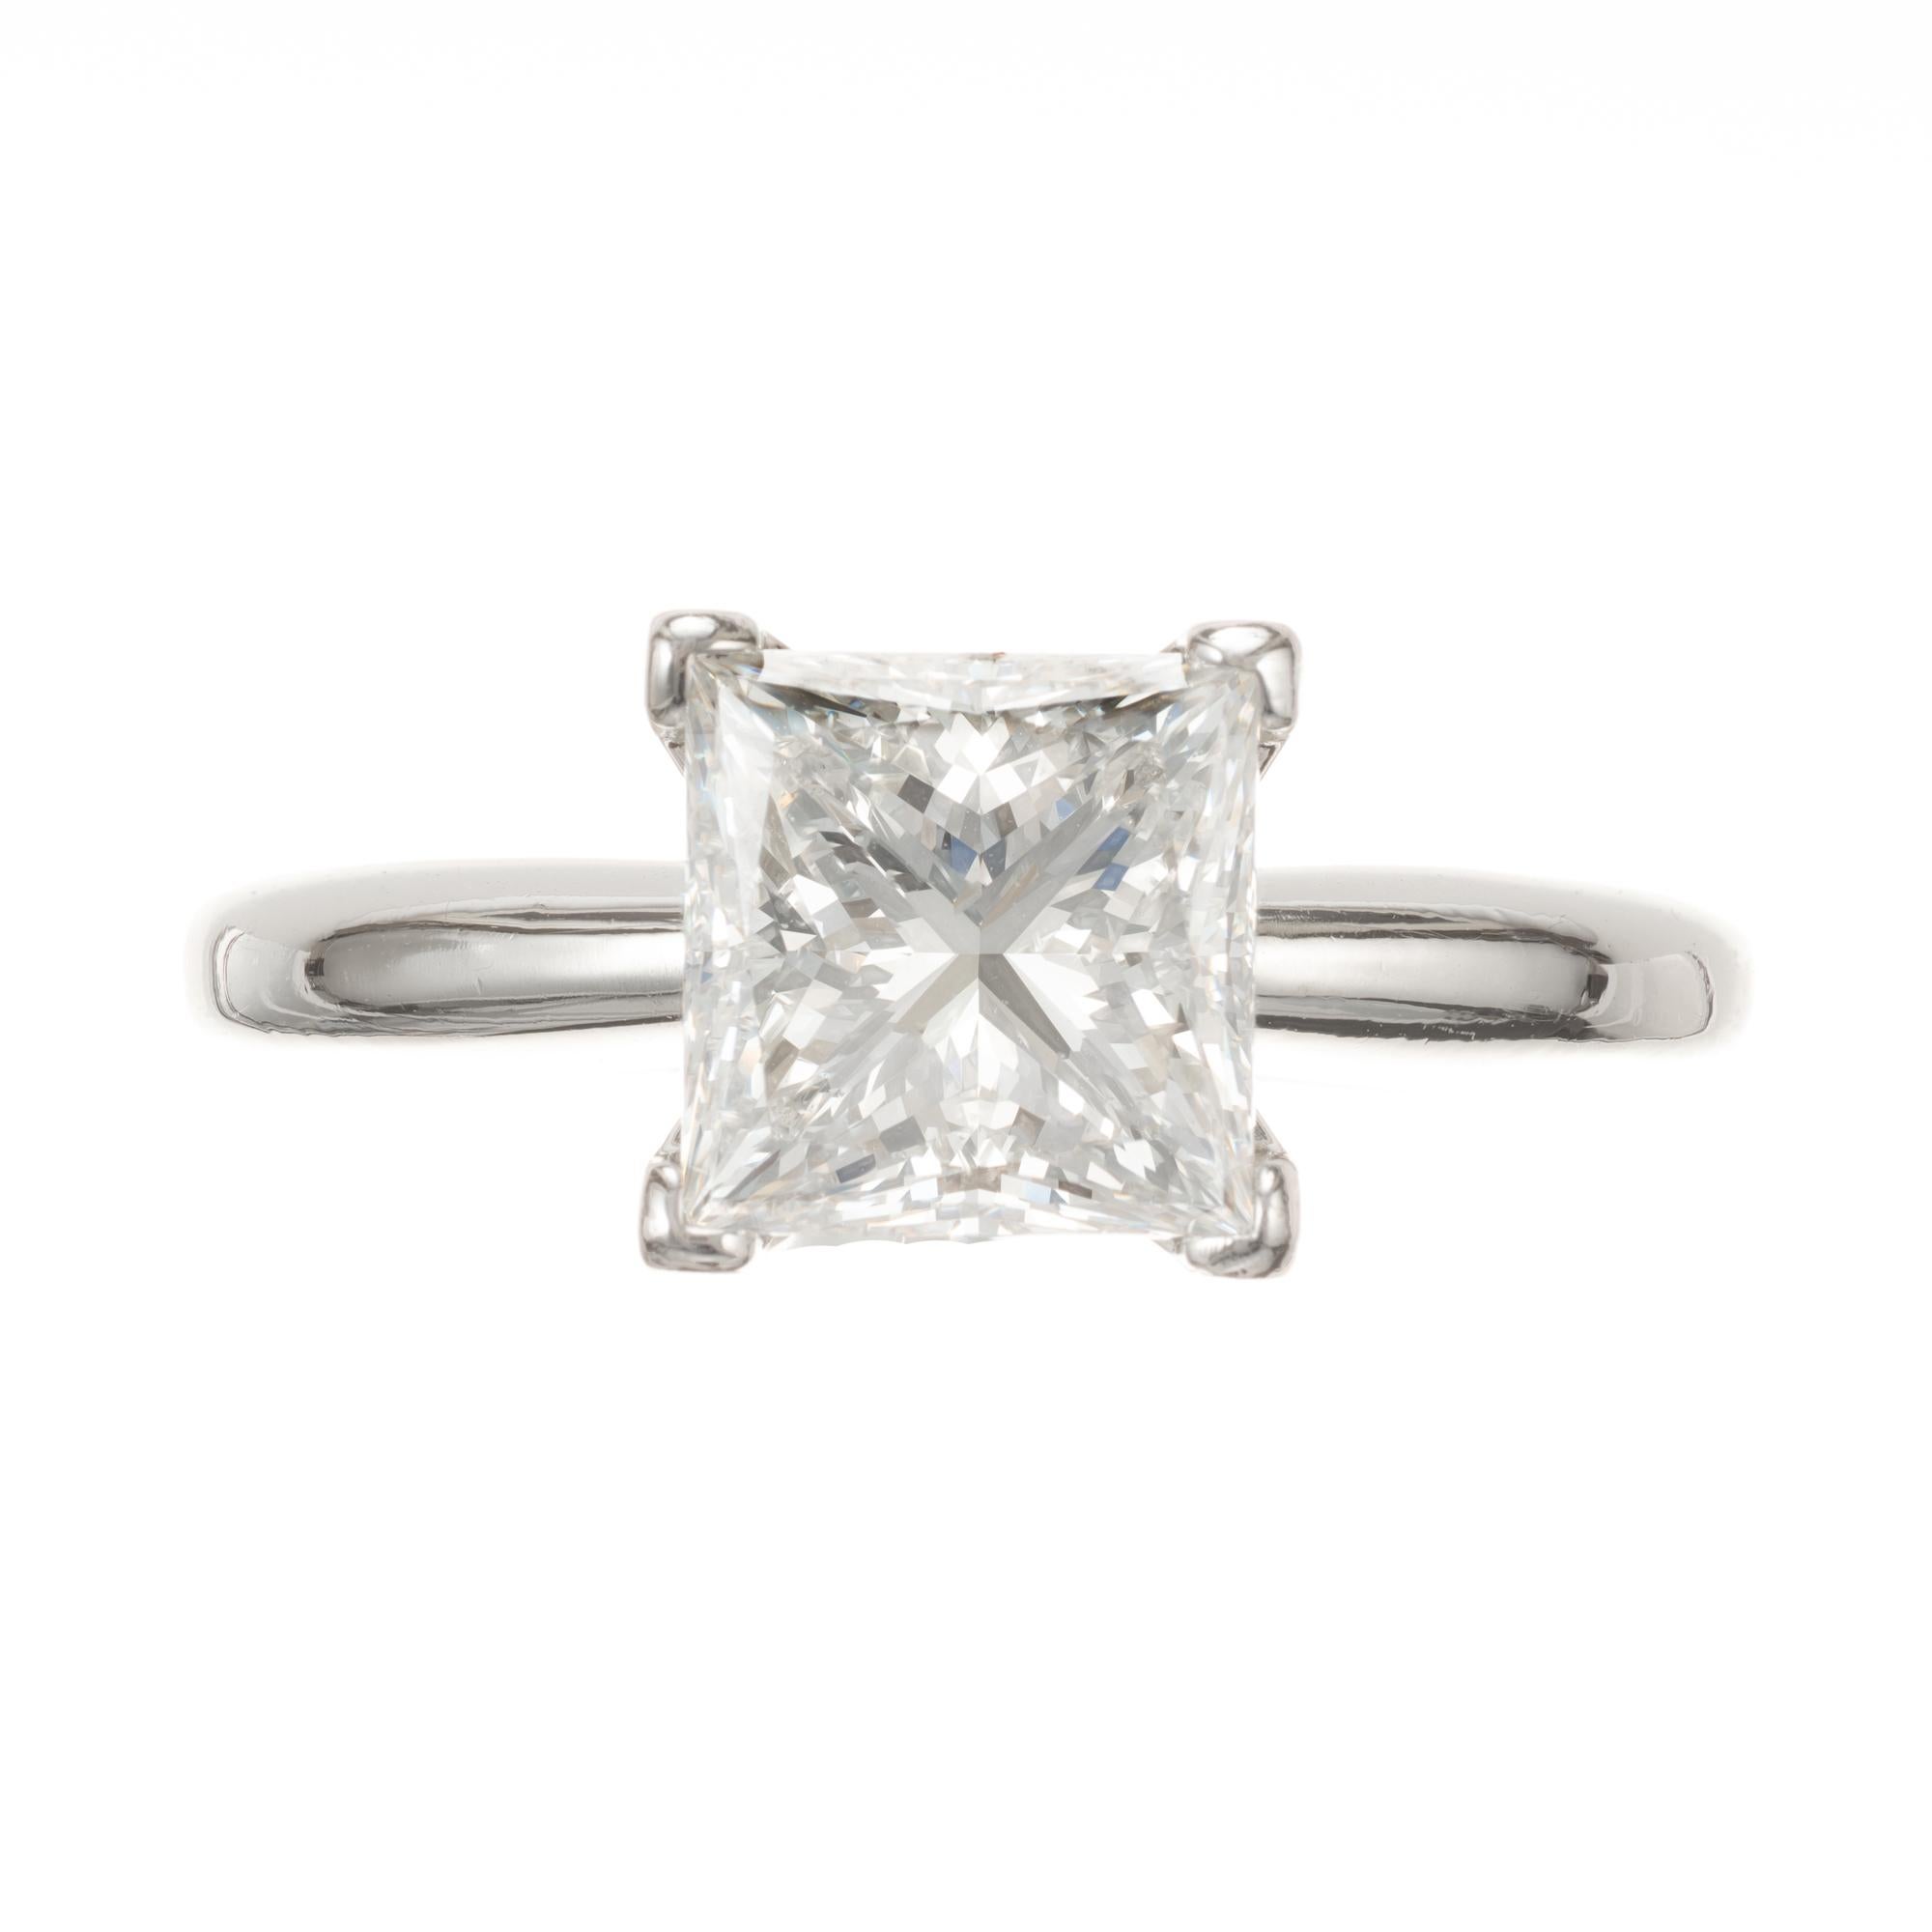 Princess cut diamond solitaire engagement ring. Platinum simple solitaire settling with square prongs in each corner to keep the shape appearing square and showing as much of the diamond as possible. 

1 Princess cut diamond 2.02cts, I, VS1, GIA